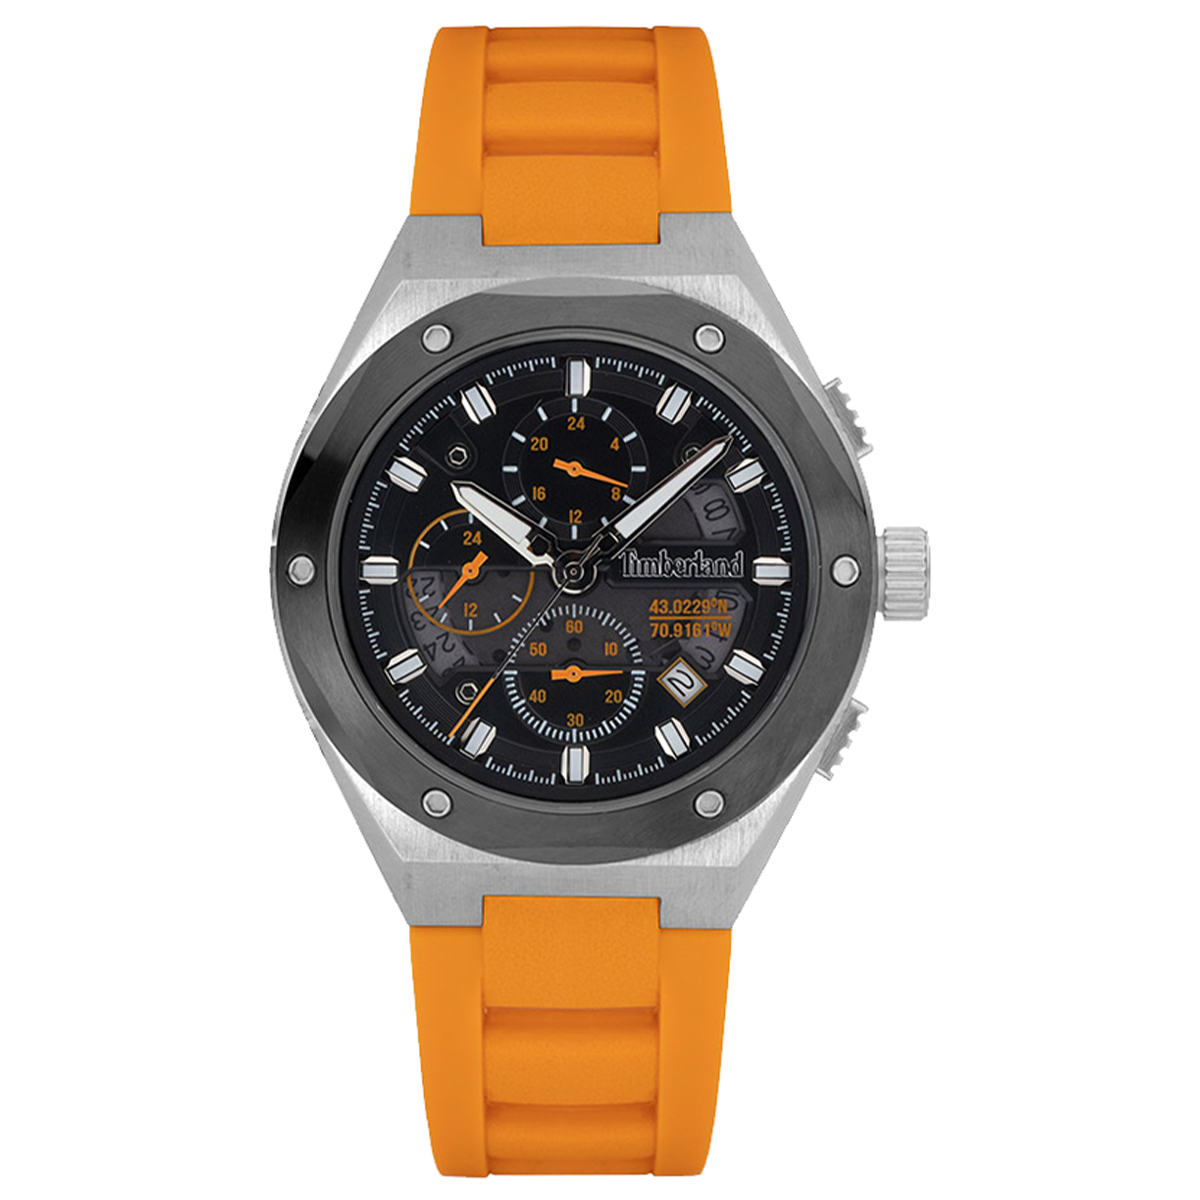 MONTRE TIMBERLAND HOMME CHRONO SILICONE